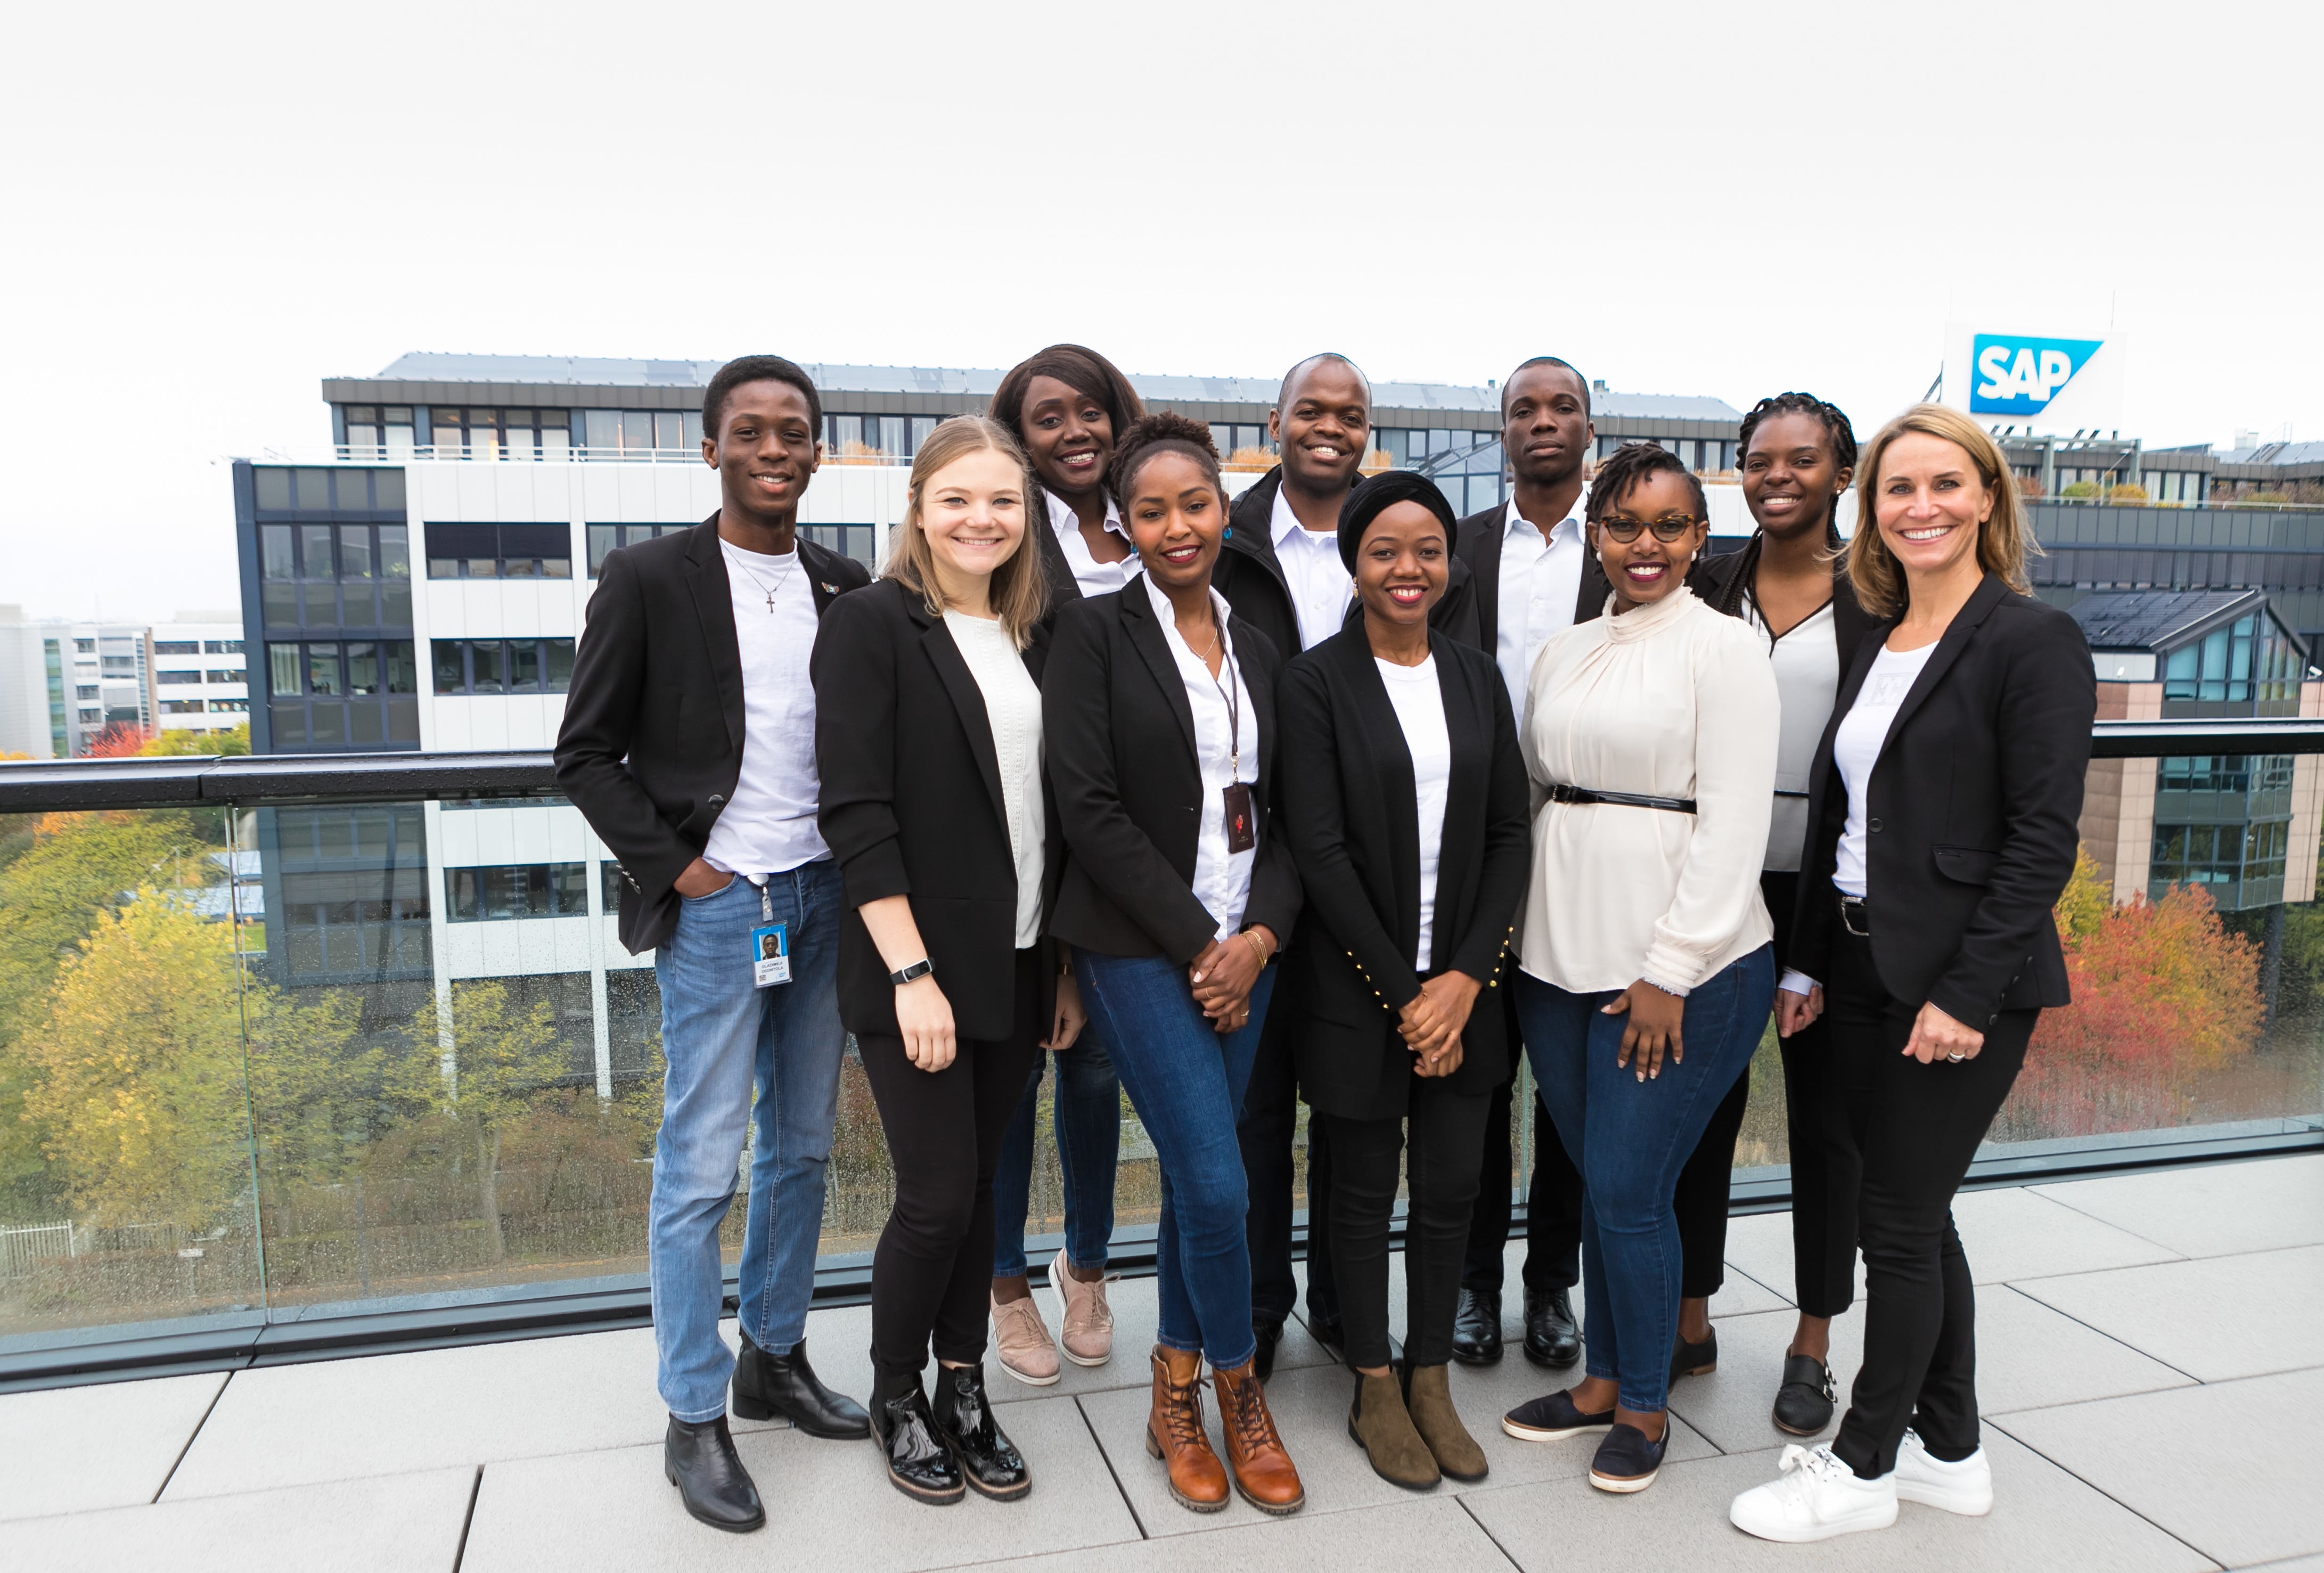 Young African Professionals Make it Big in Germany